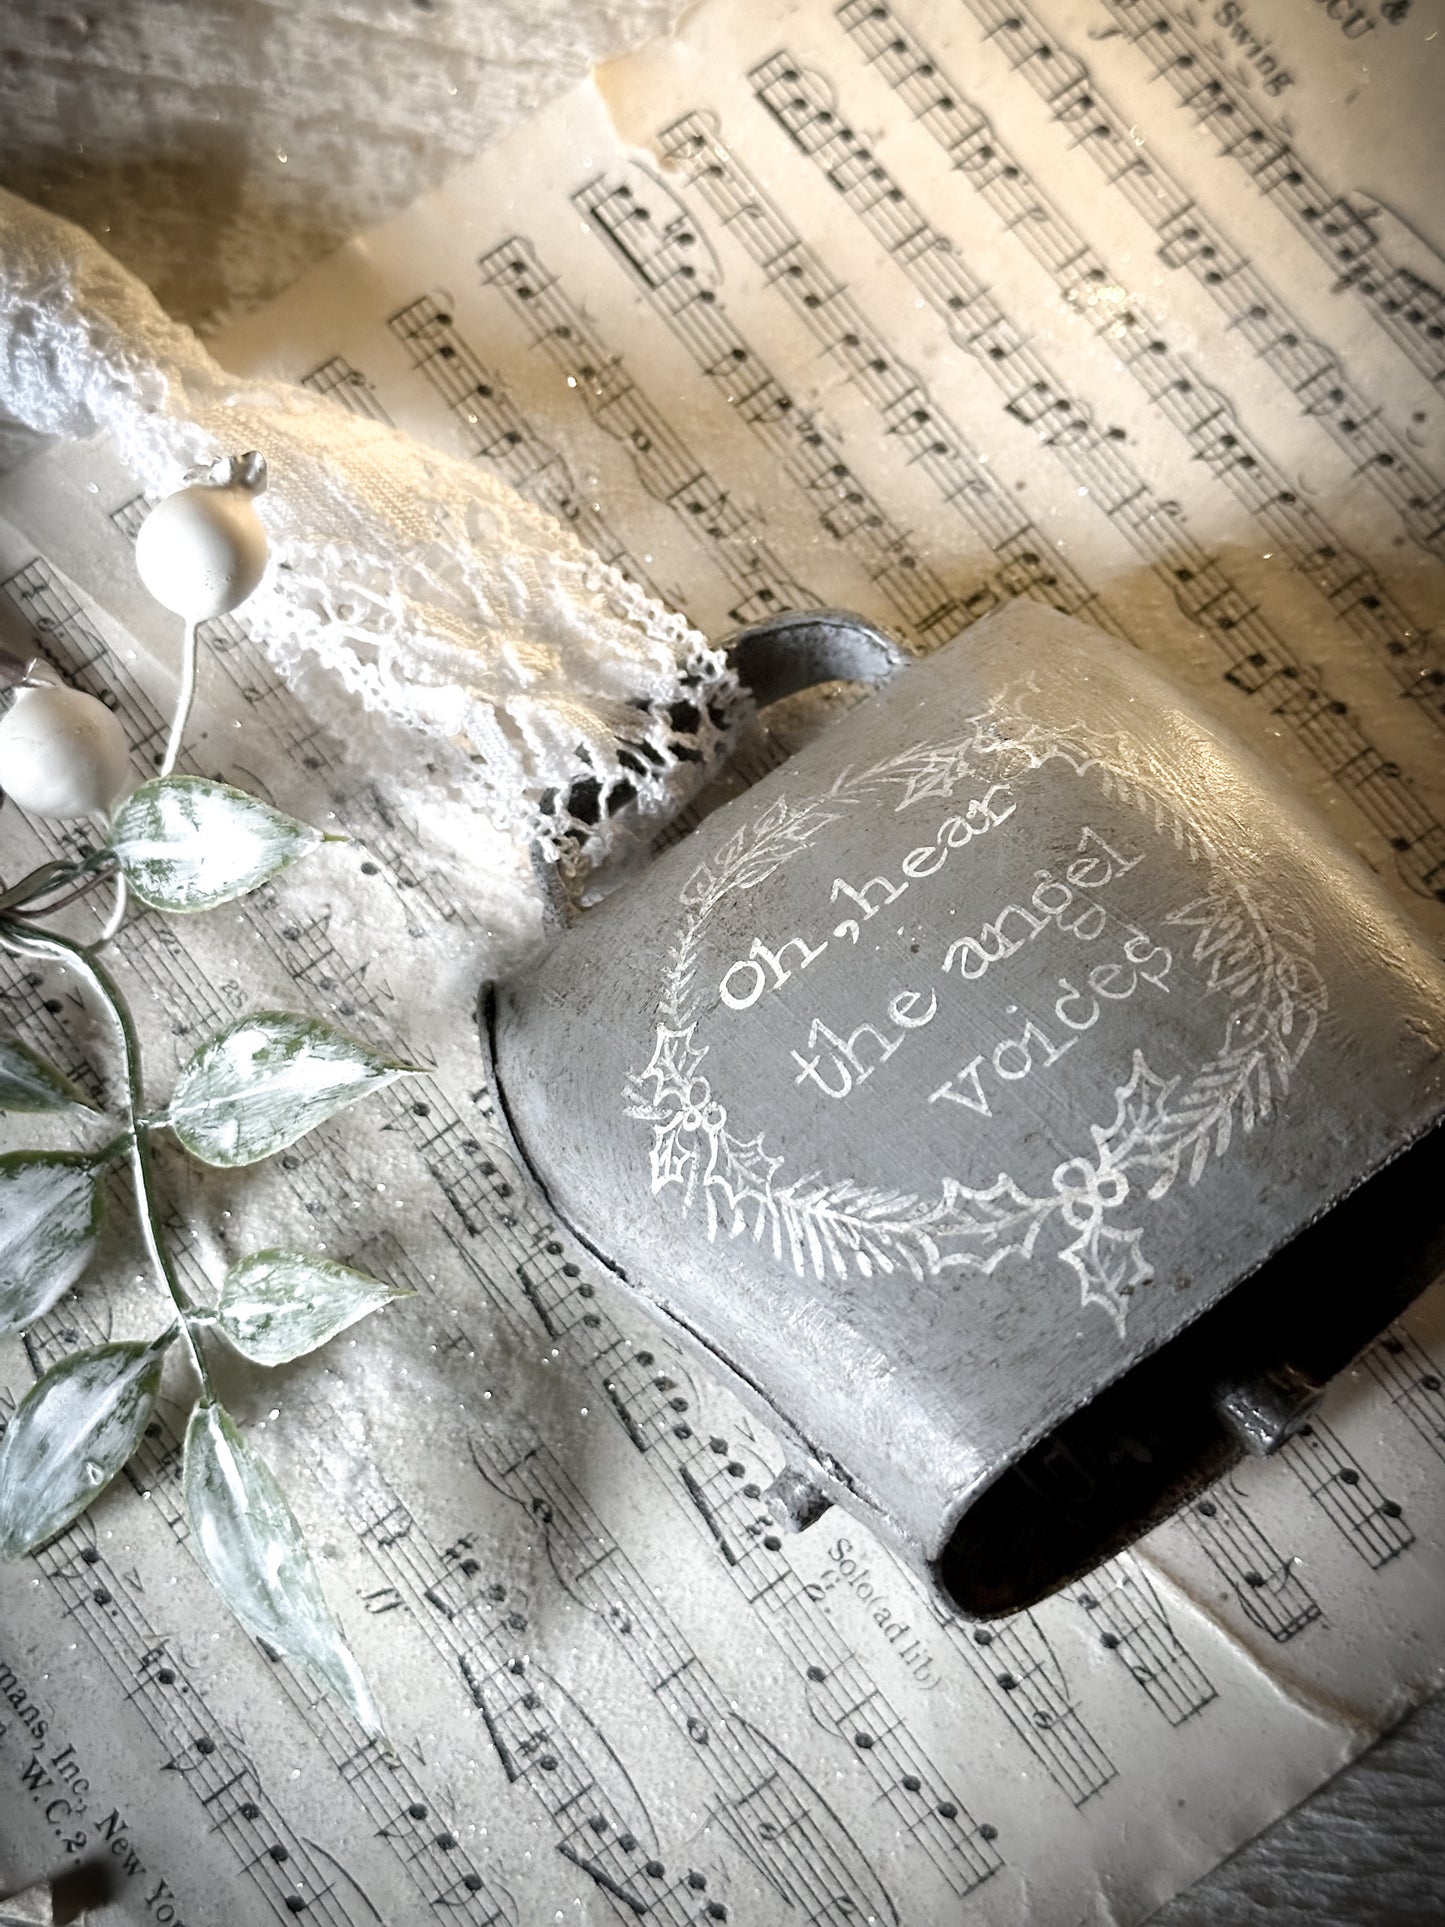 A vintage bell with a hand painted quote